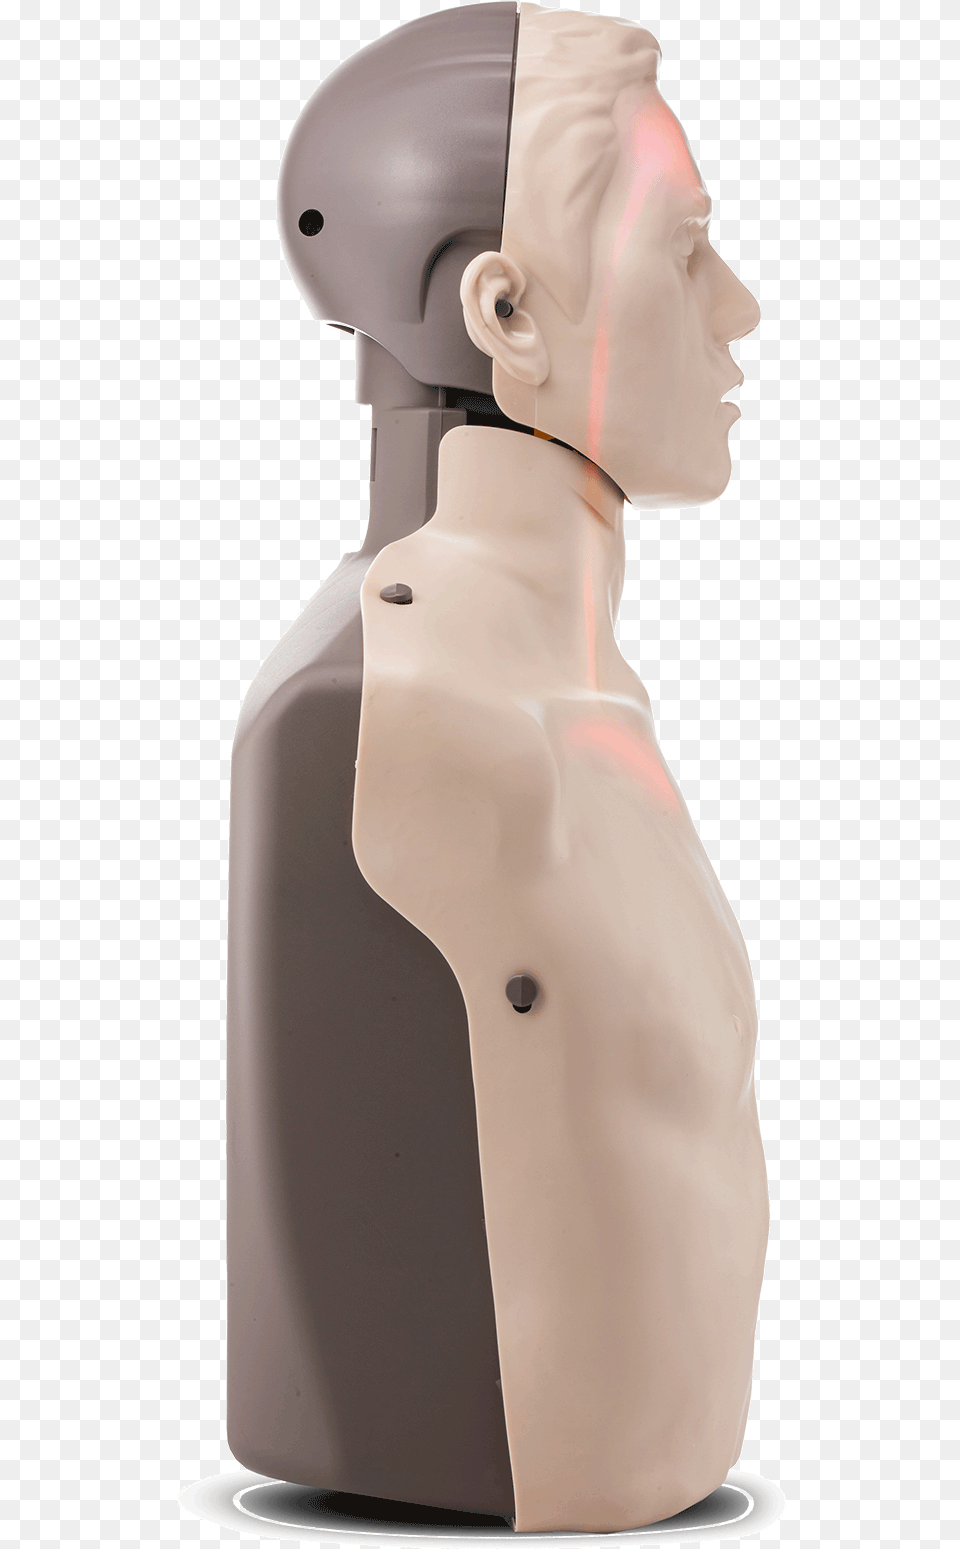 Bigred Cpr Manikin With Led Light Cpr Feedback Figurine, Body Part, Person, Torso, Adult Png Image